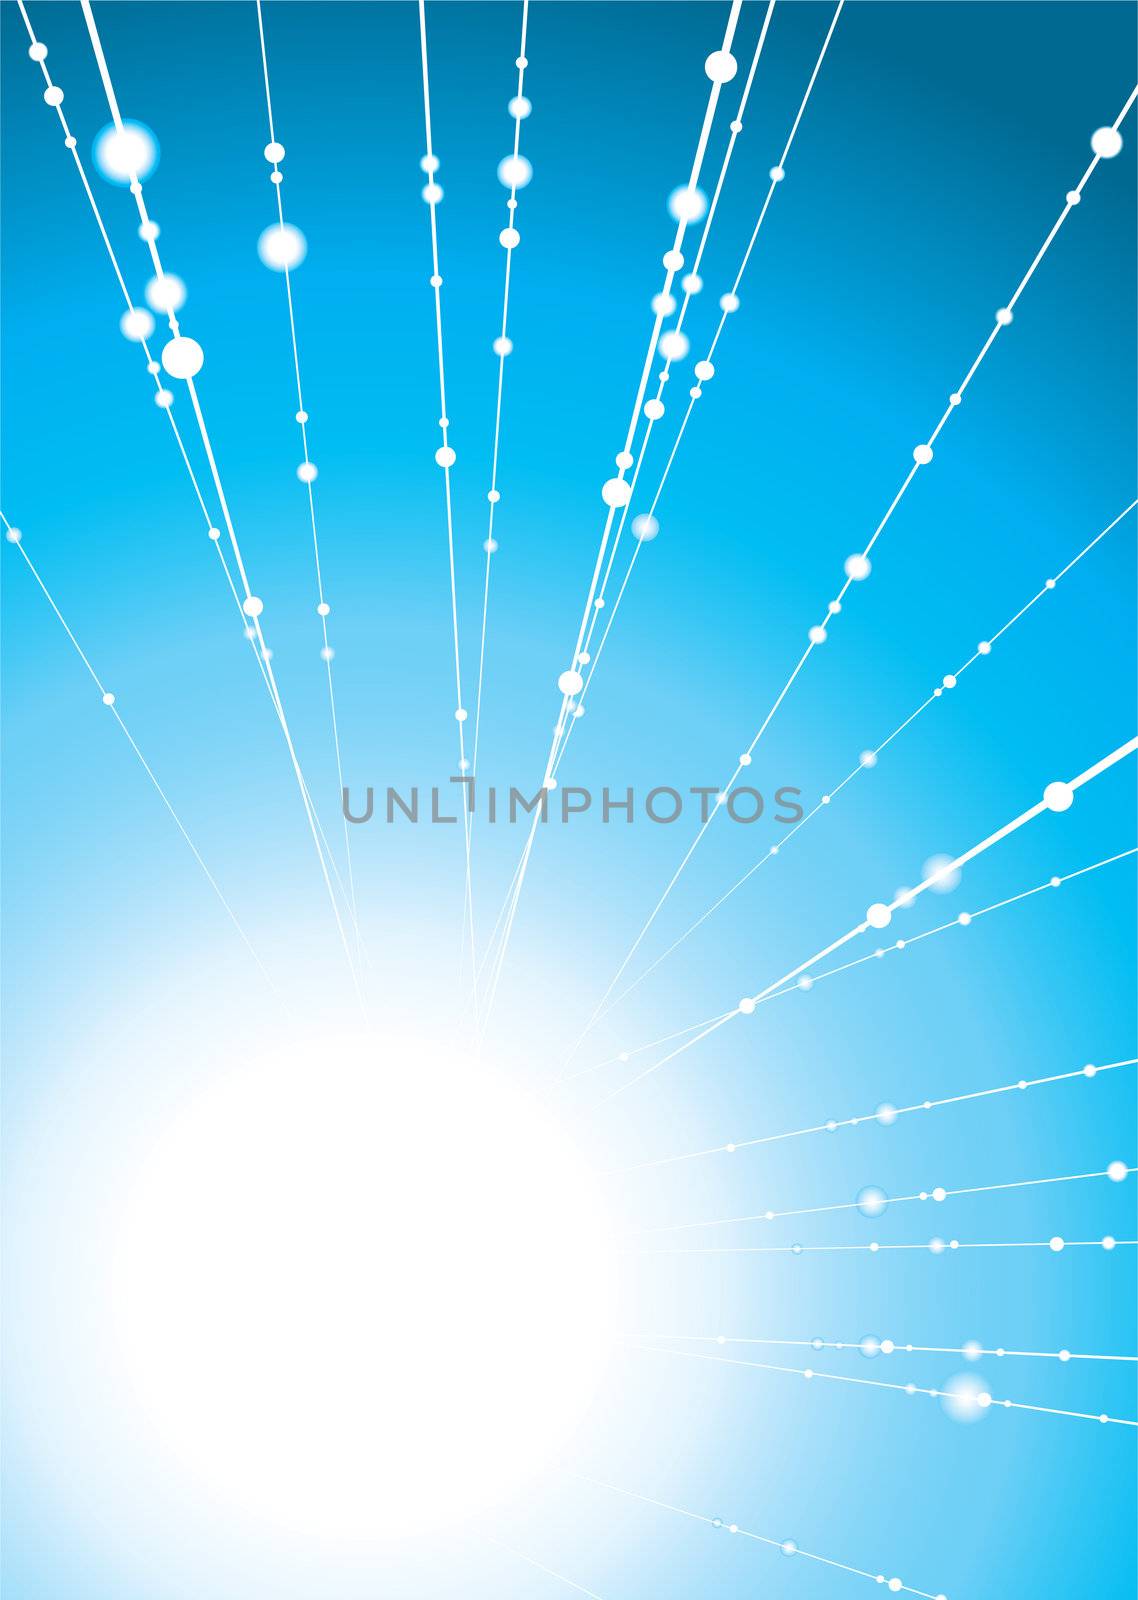 Abstract illustrated star image with rays of light shooting out